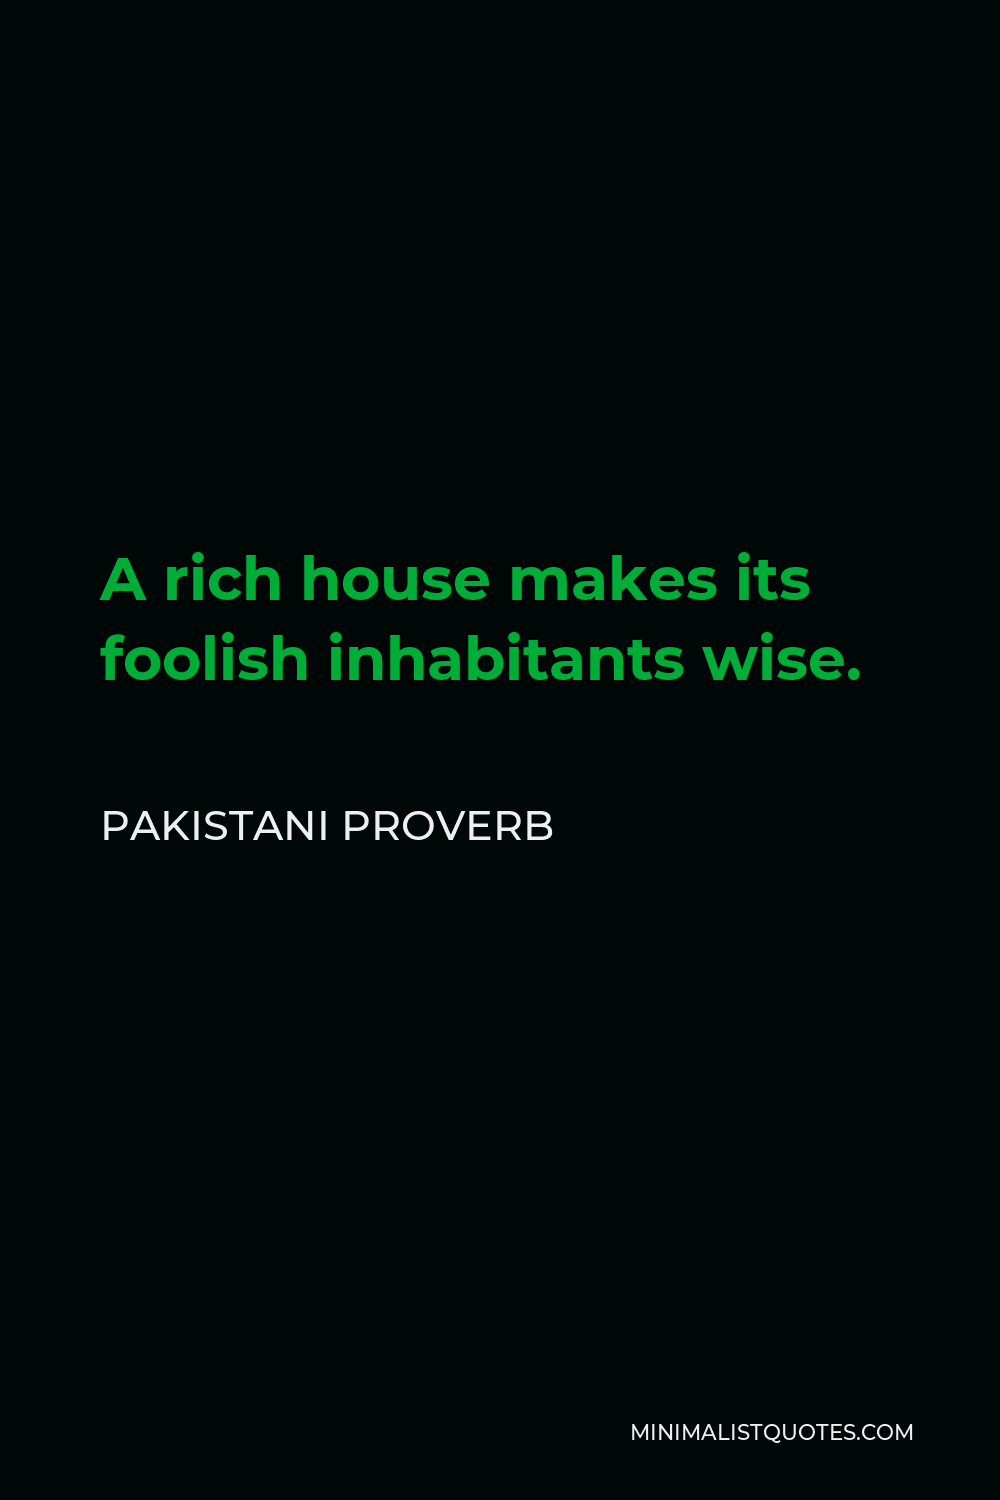 Pakistani Proverb Quote - A rich house makes its foolish inhabitants wise.